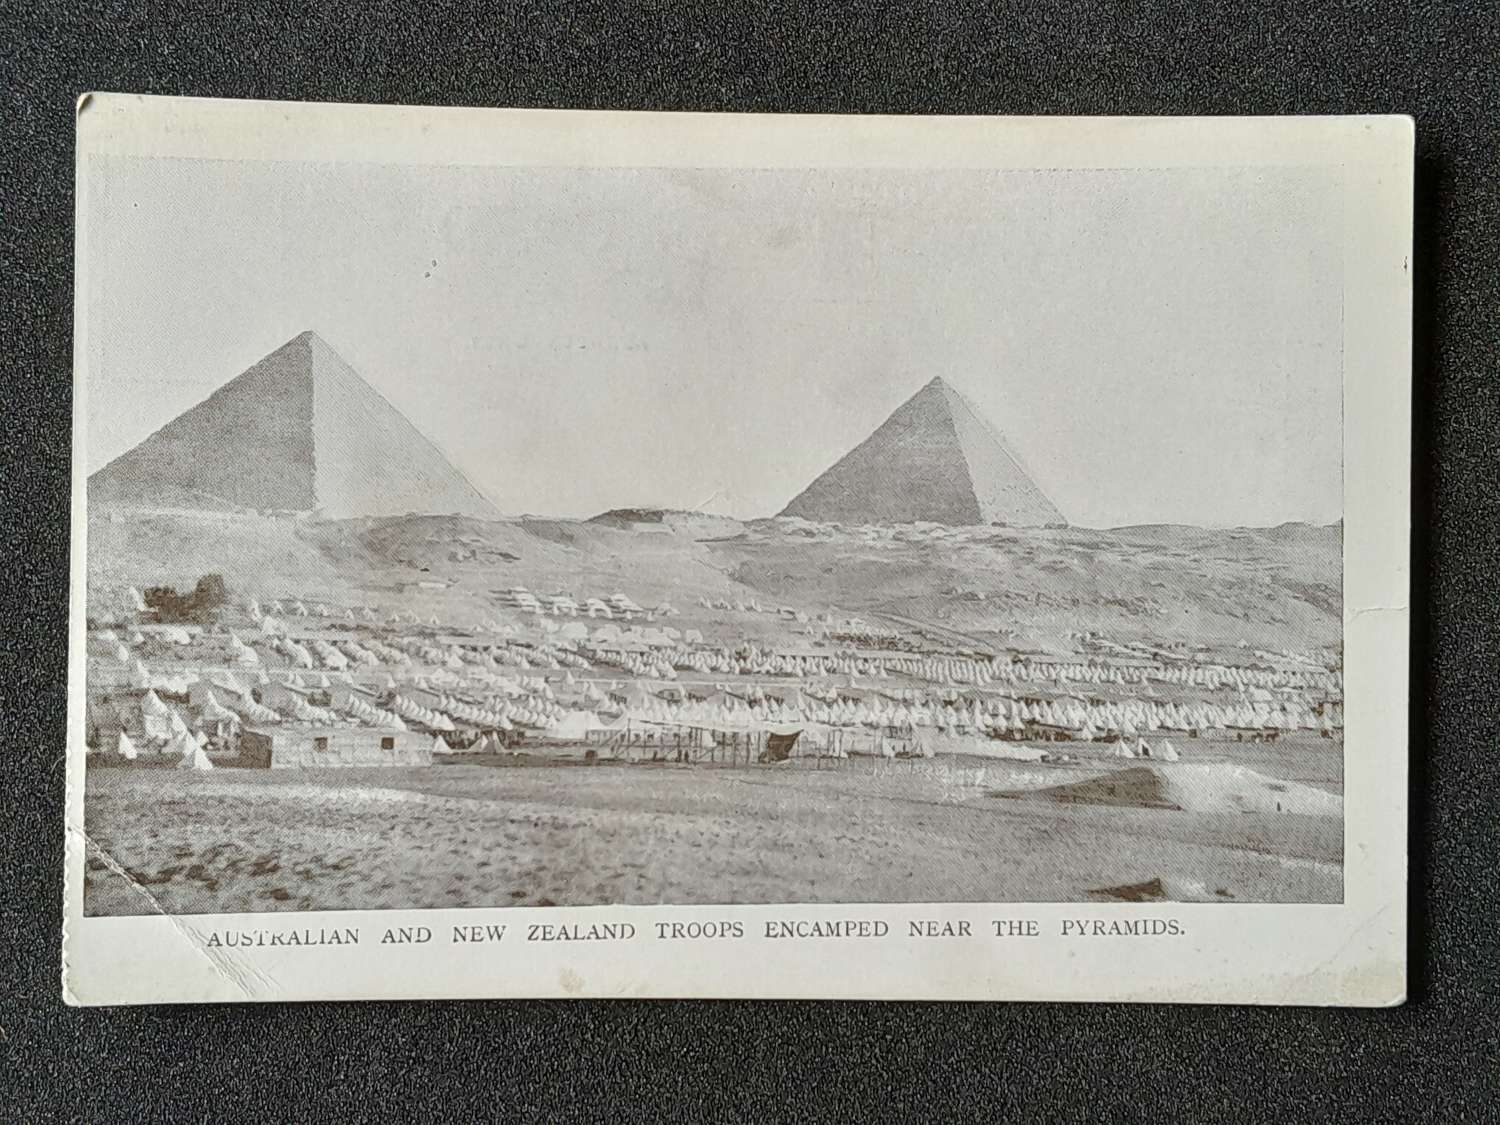 Australian and New Zealand Troops and Encamped near the Pyramids